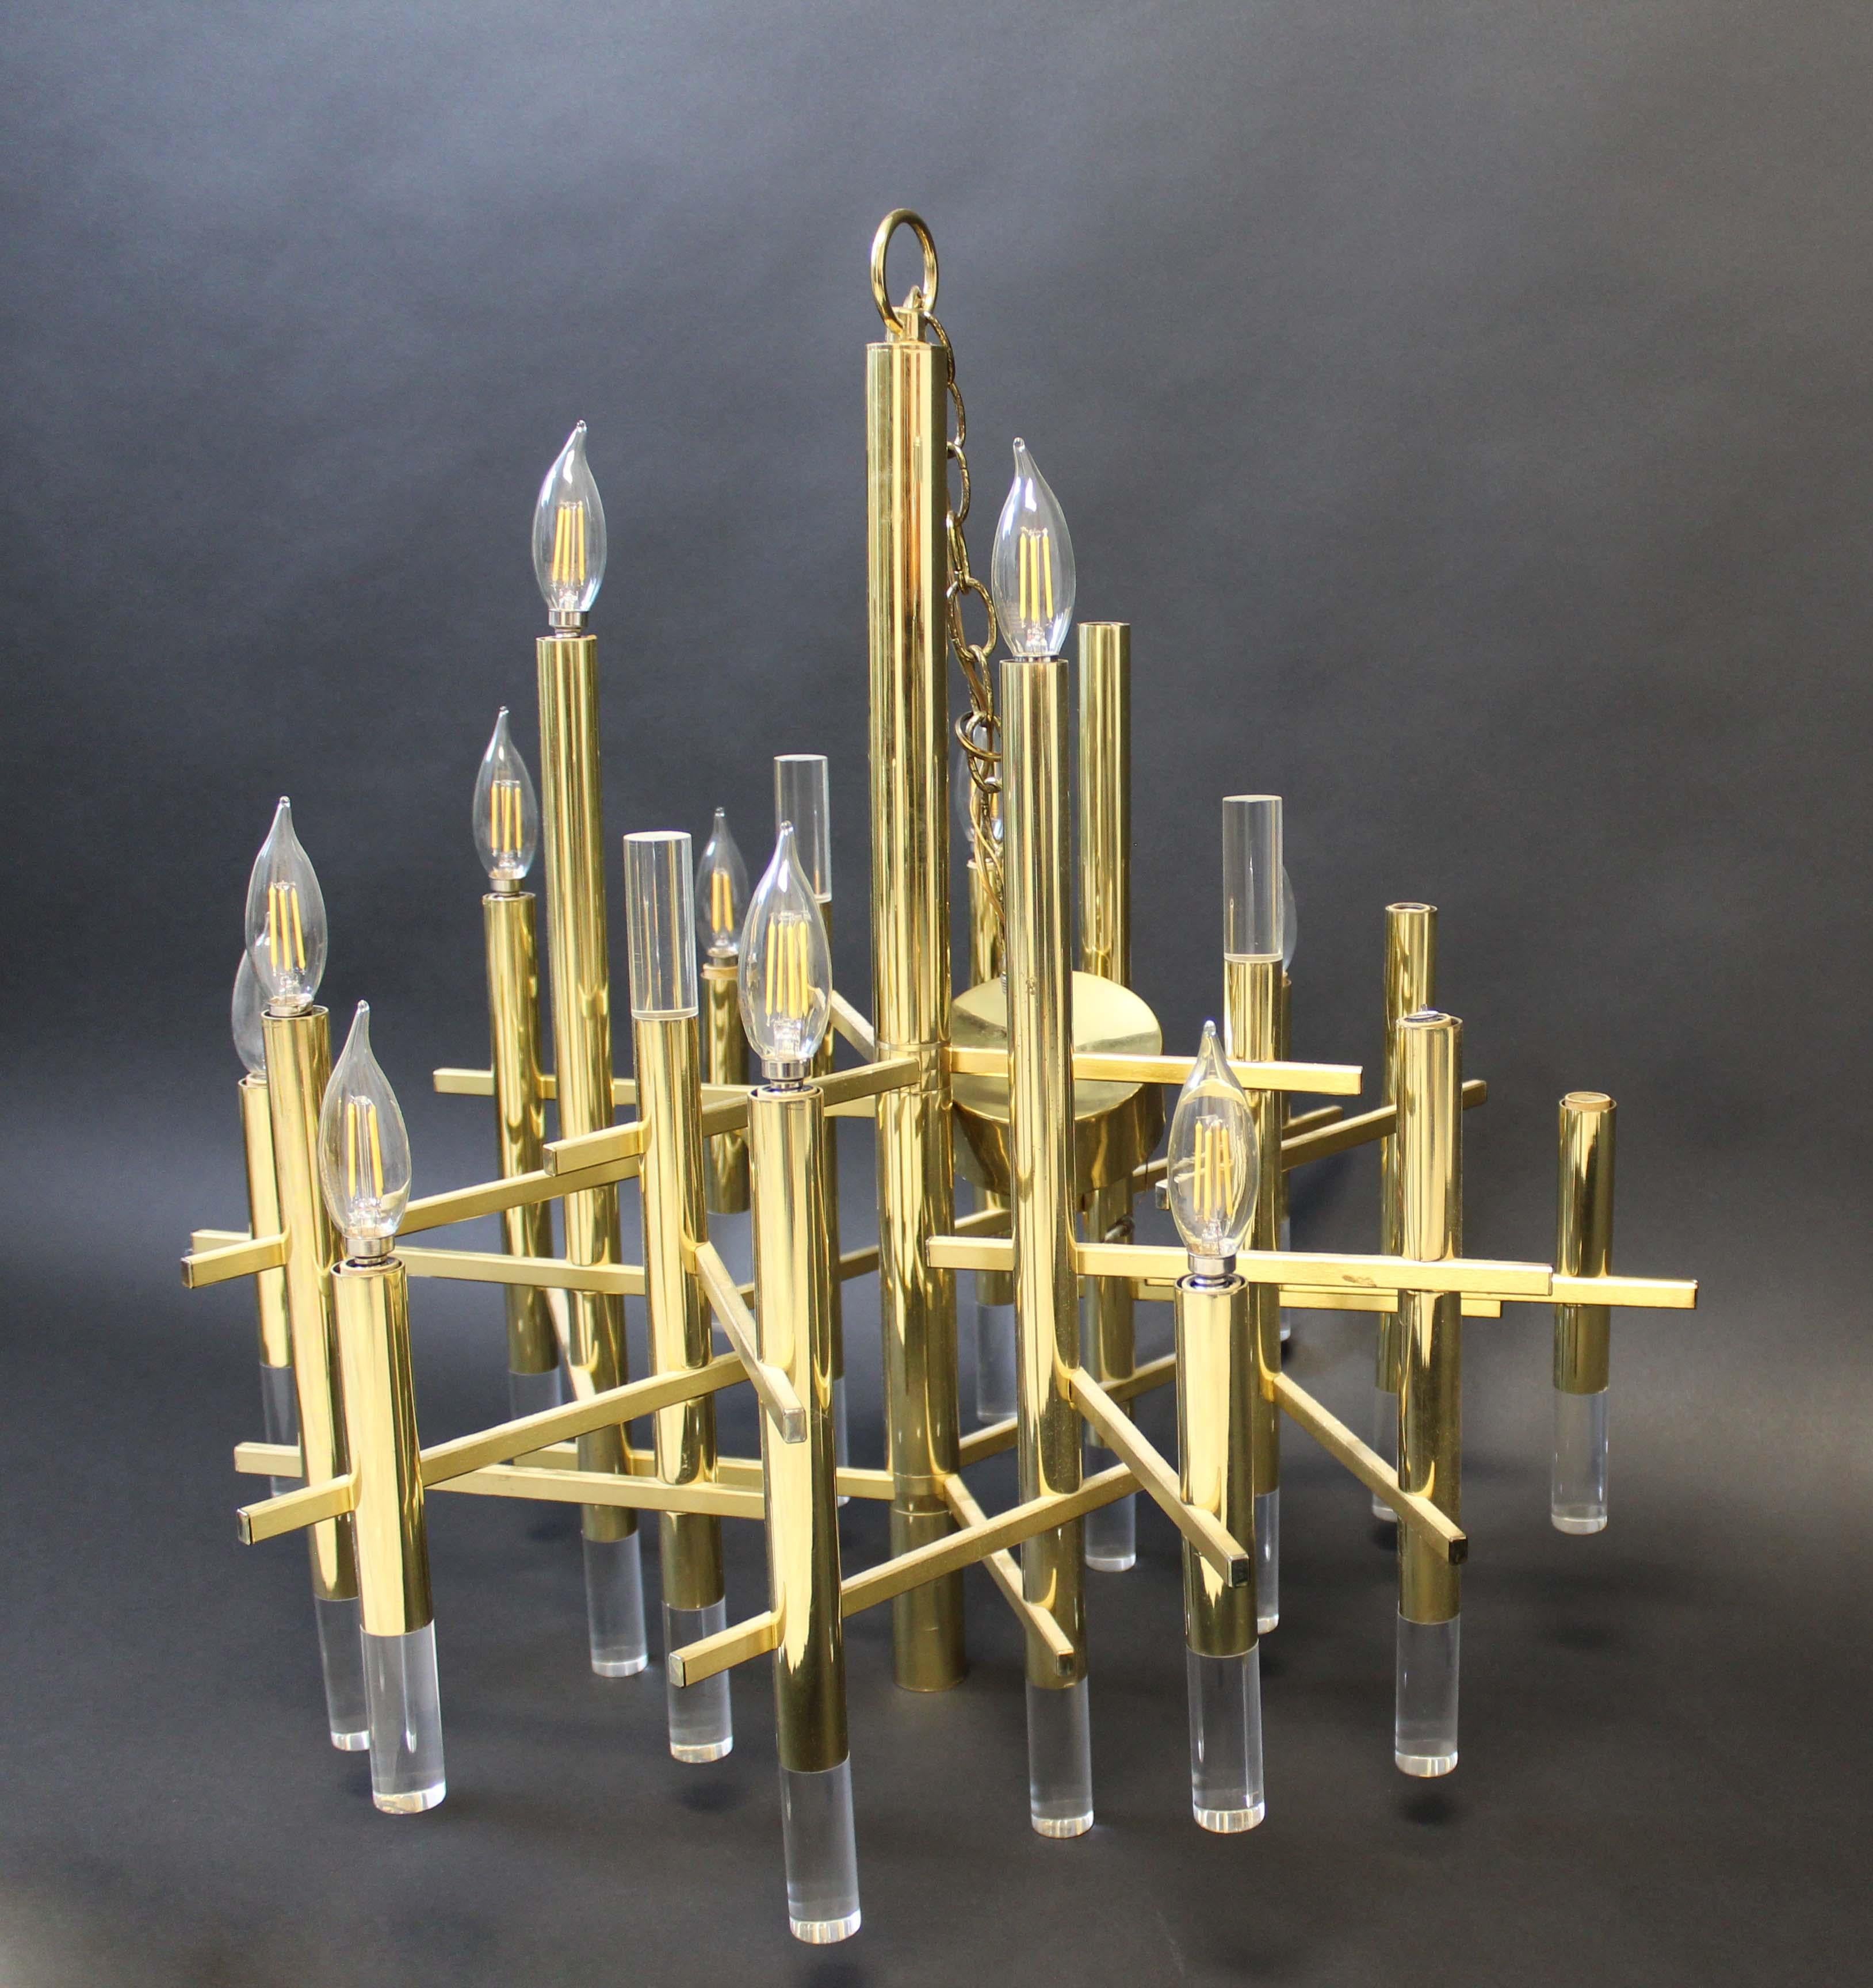 Stunning, multi-arm brass chandelier with Lucite details, making this a focal point to any dining room whether traditional or modern.

In very good condition, with little or no imperfections. Hardwired.

Dimensions: 26.5